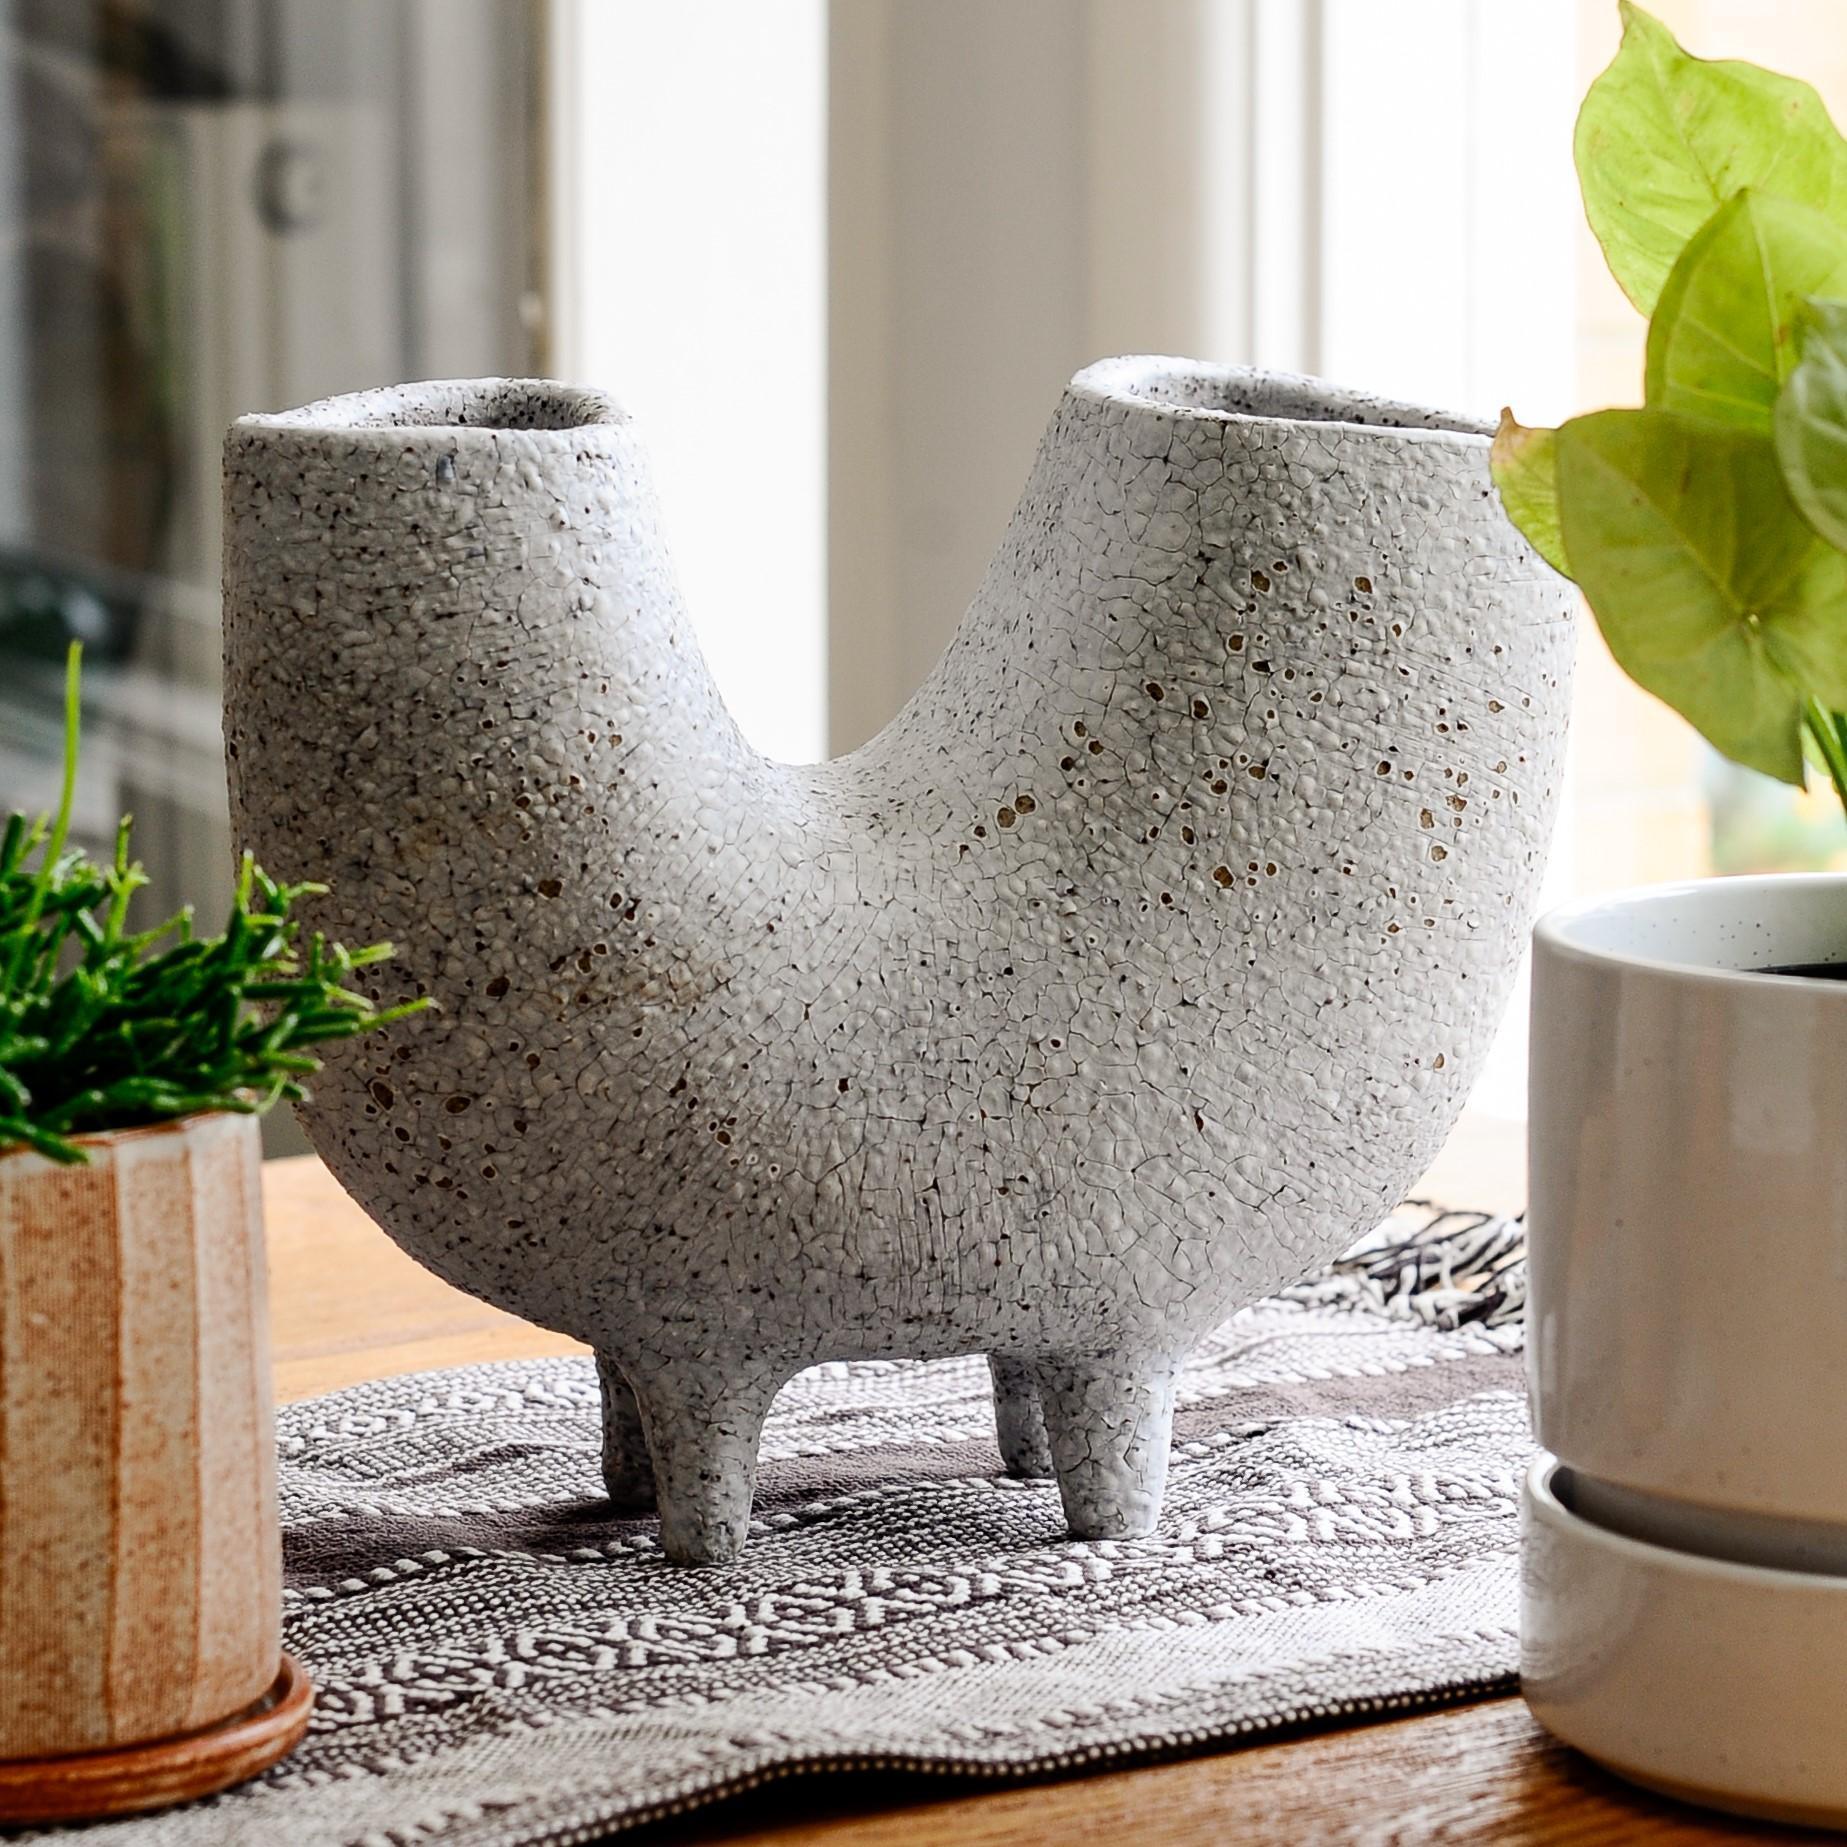 Del Fango Planter by Buzzby &amp; Fang - THE PLANT SOCIETY